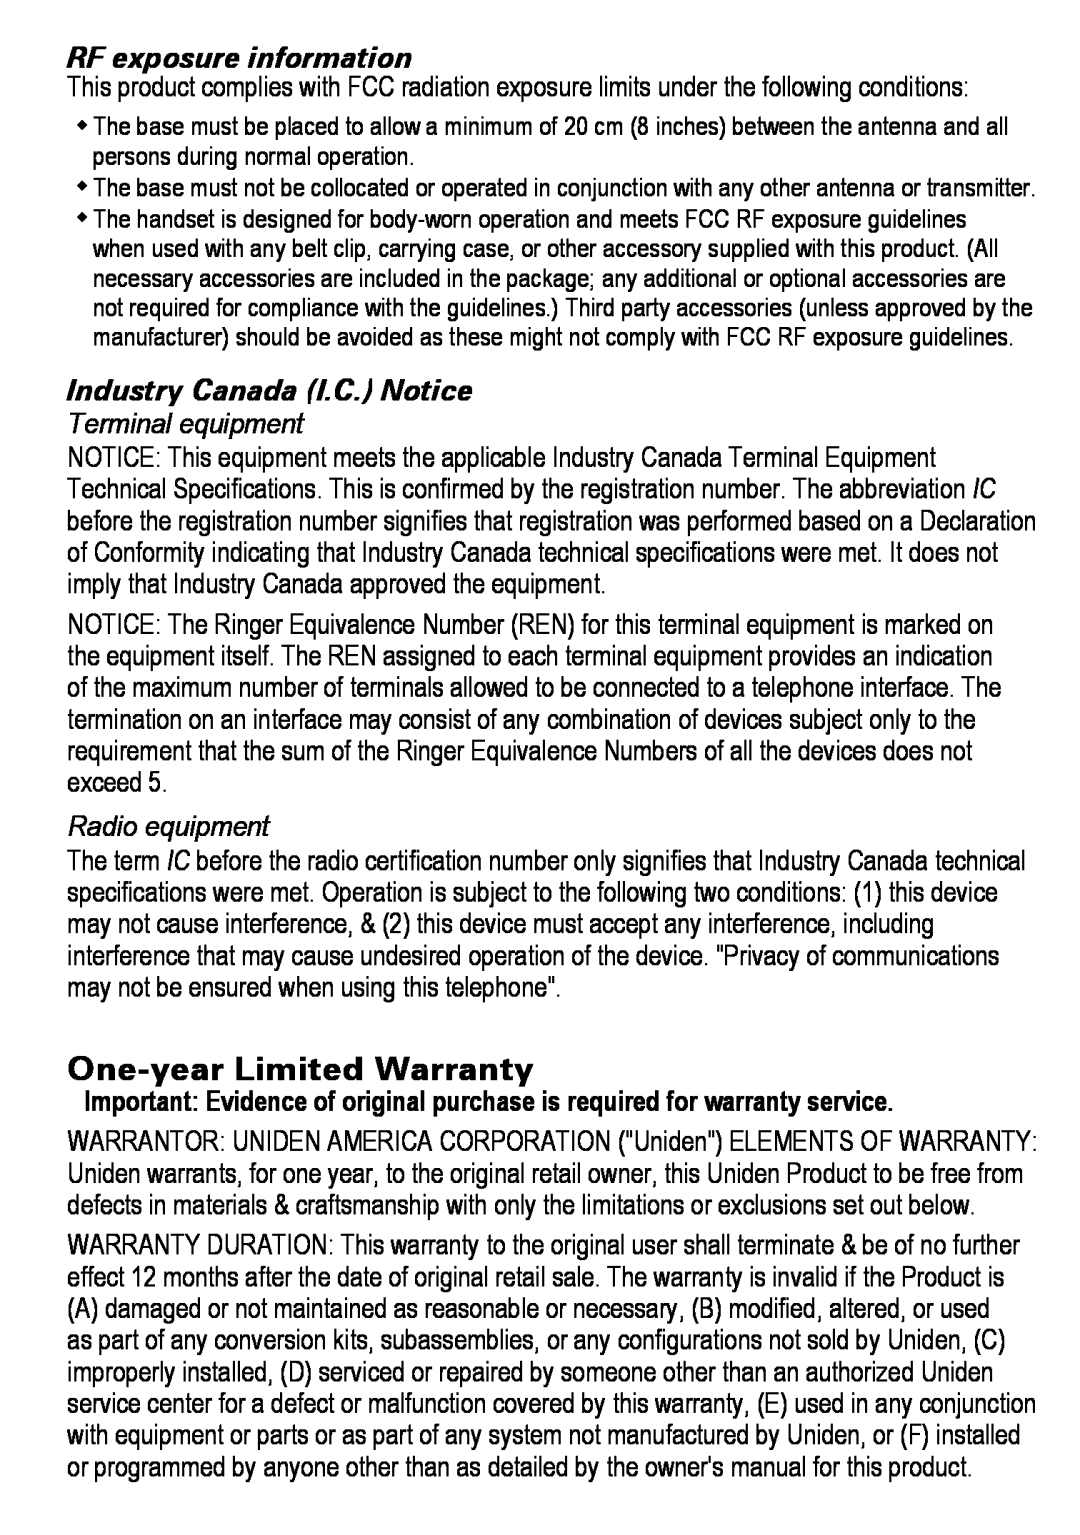 Uniden DECT4086-2, DECT4086-4 manual One-year Limited Warranty, RF exposure information, Industry Canada I.C. Notice 